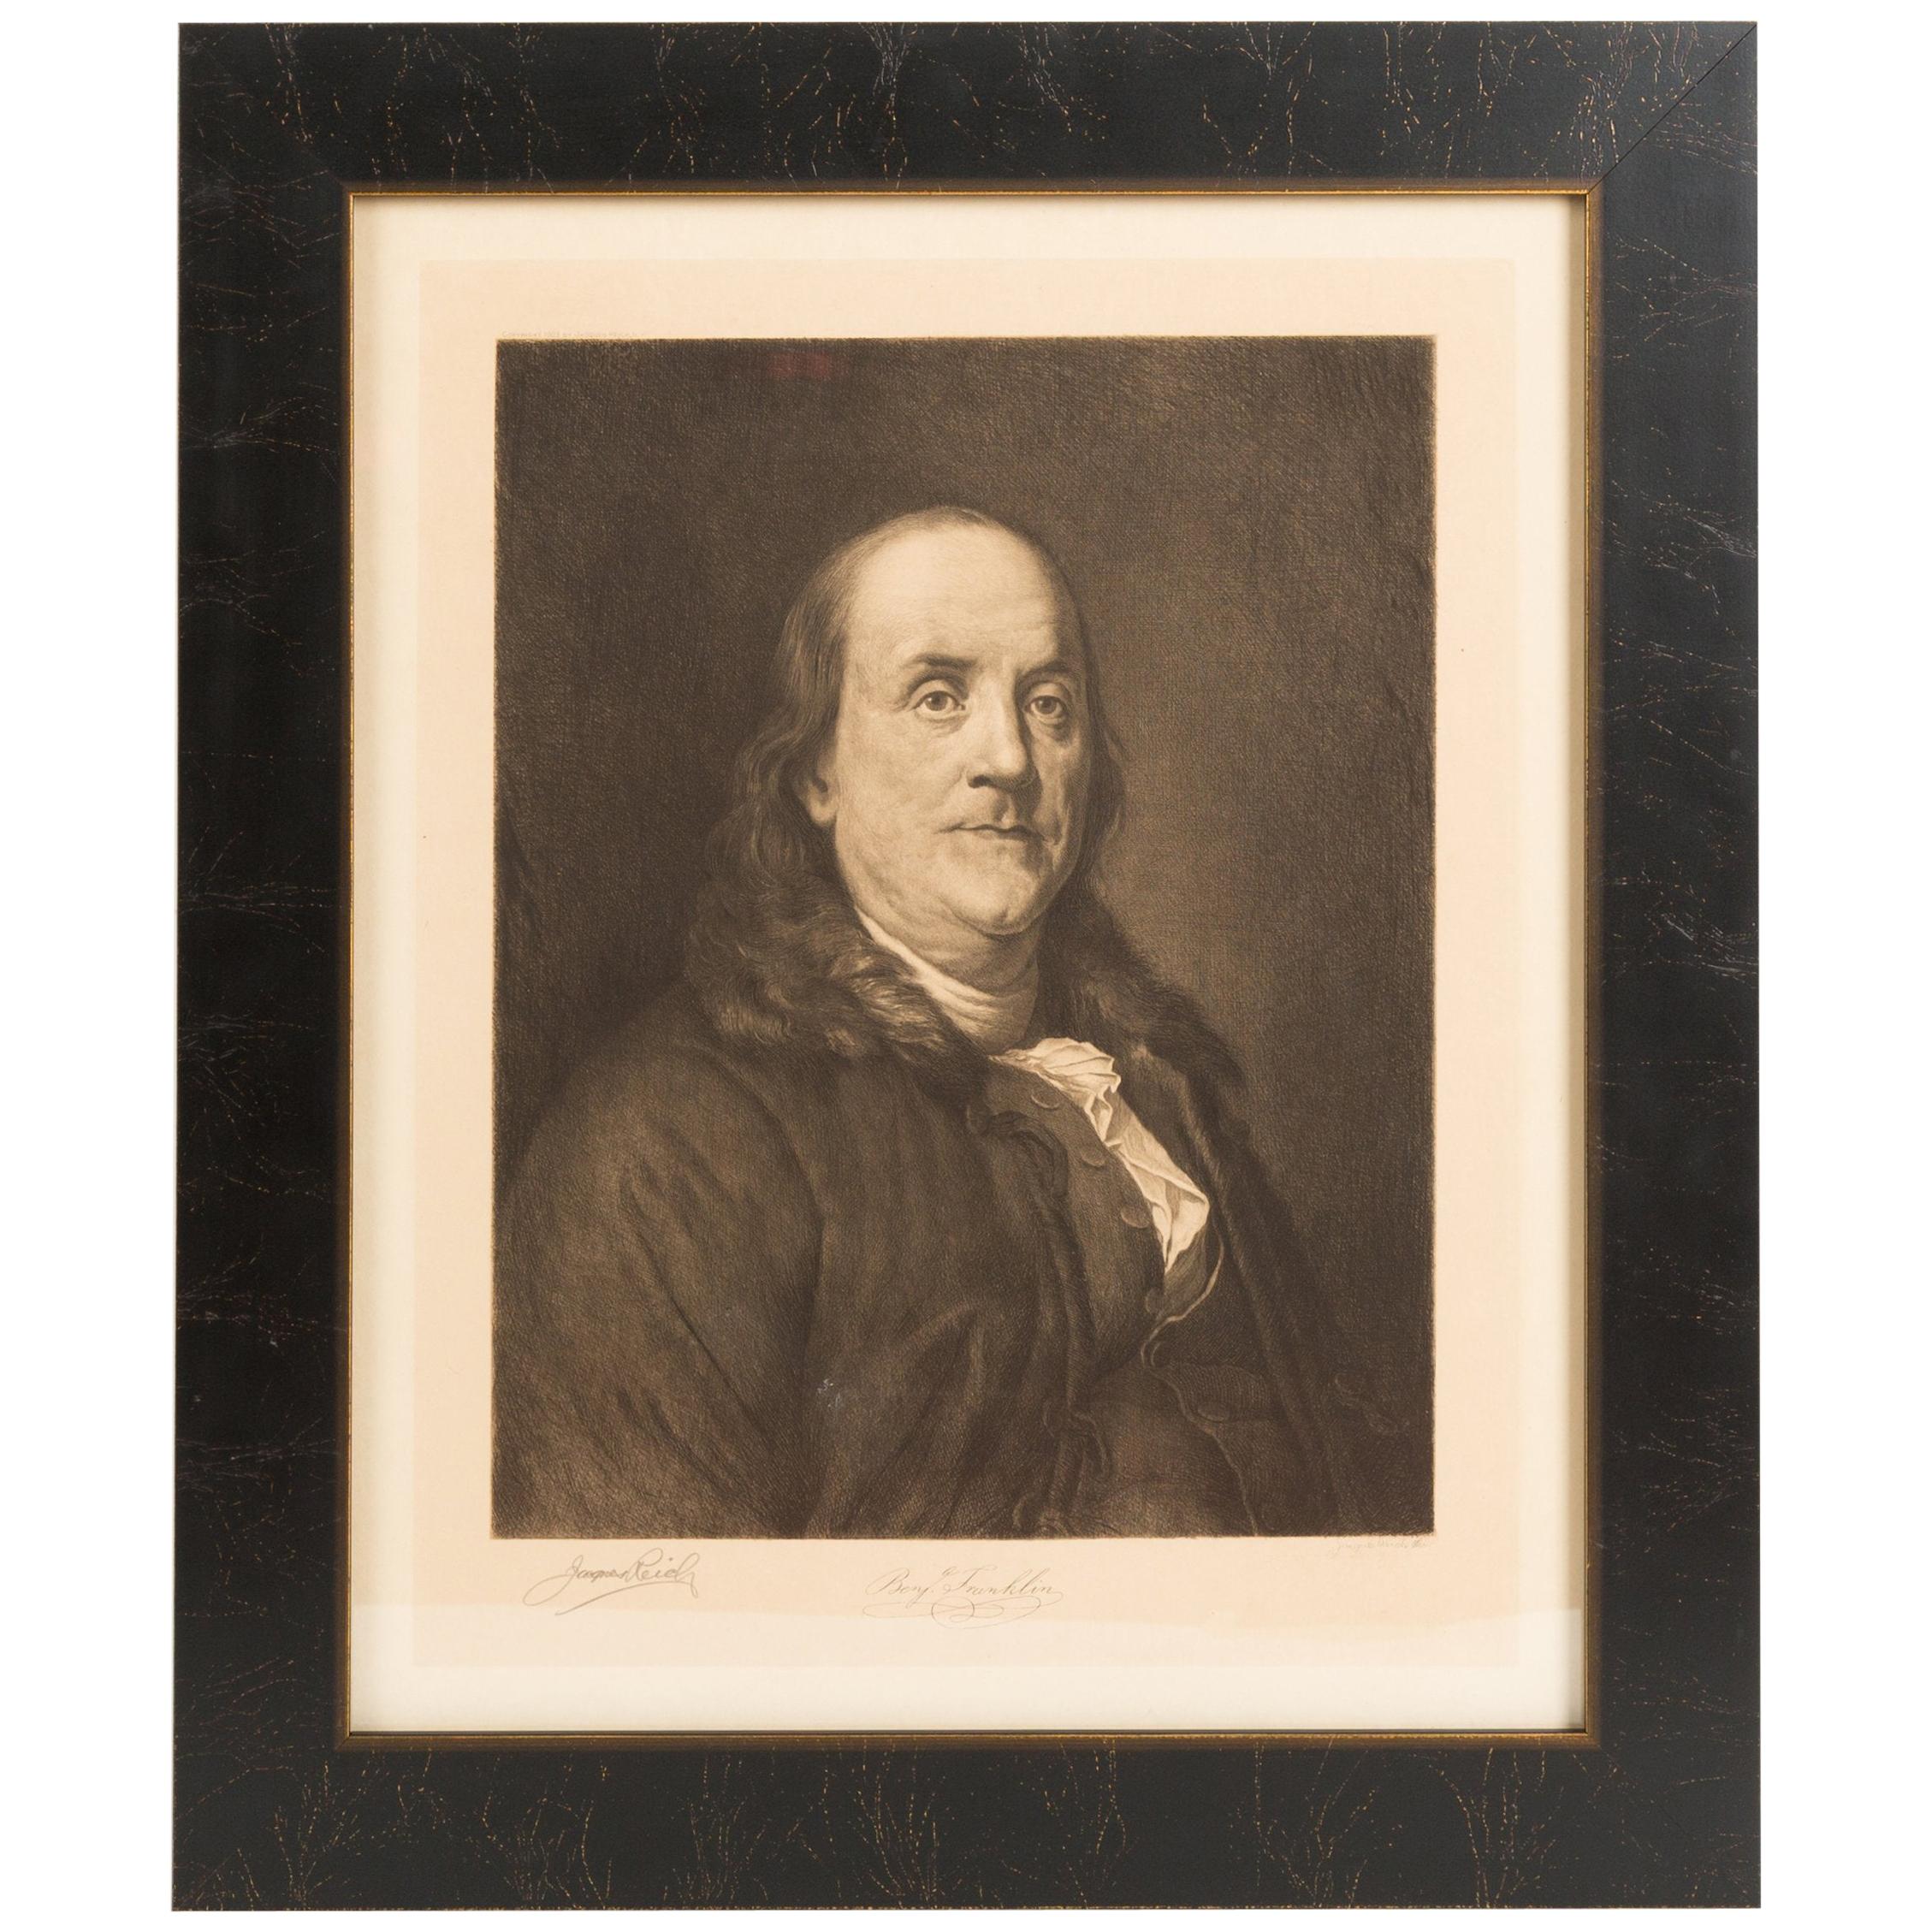 1903 Antique Portrait of Benjamin Franklin, Signed by Jacques Reich